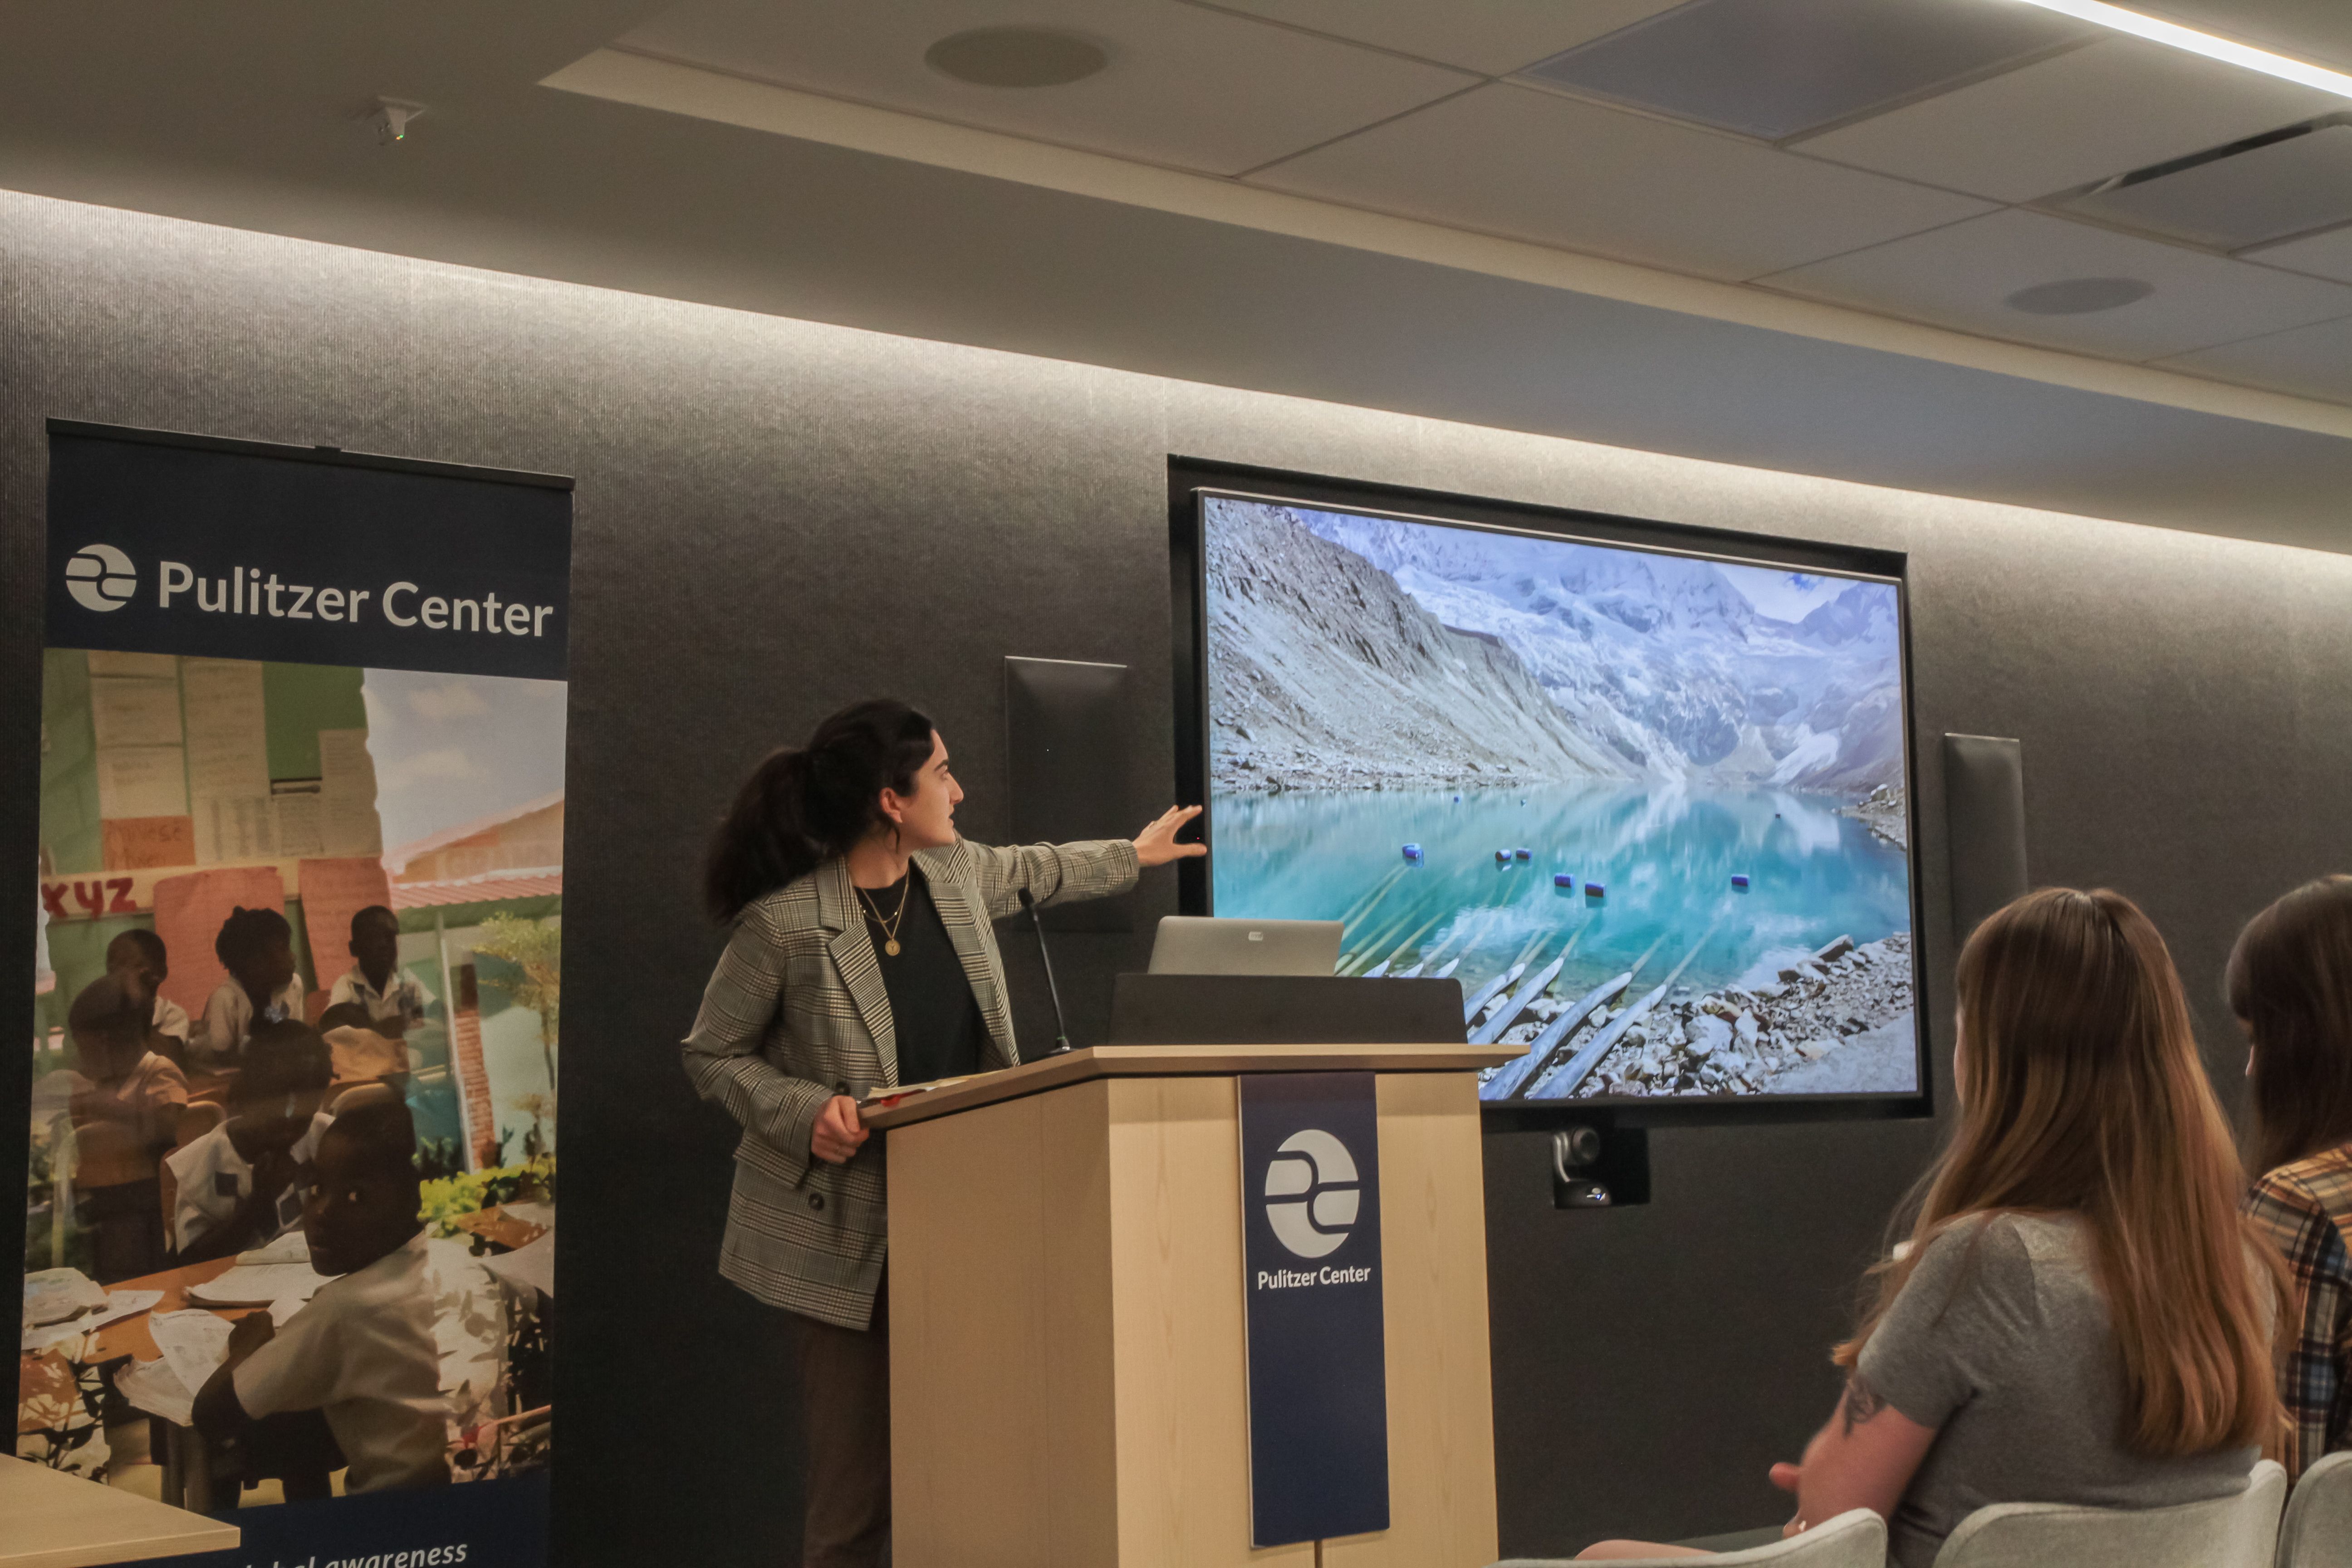 Audrey Fromson from the University of Chicago discusses climate change threats in Huaraz, Peru. Image by Libby Moeller. United States, 2019.